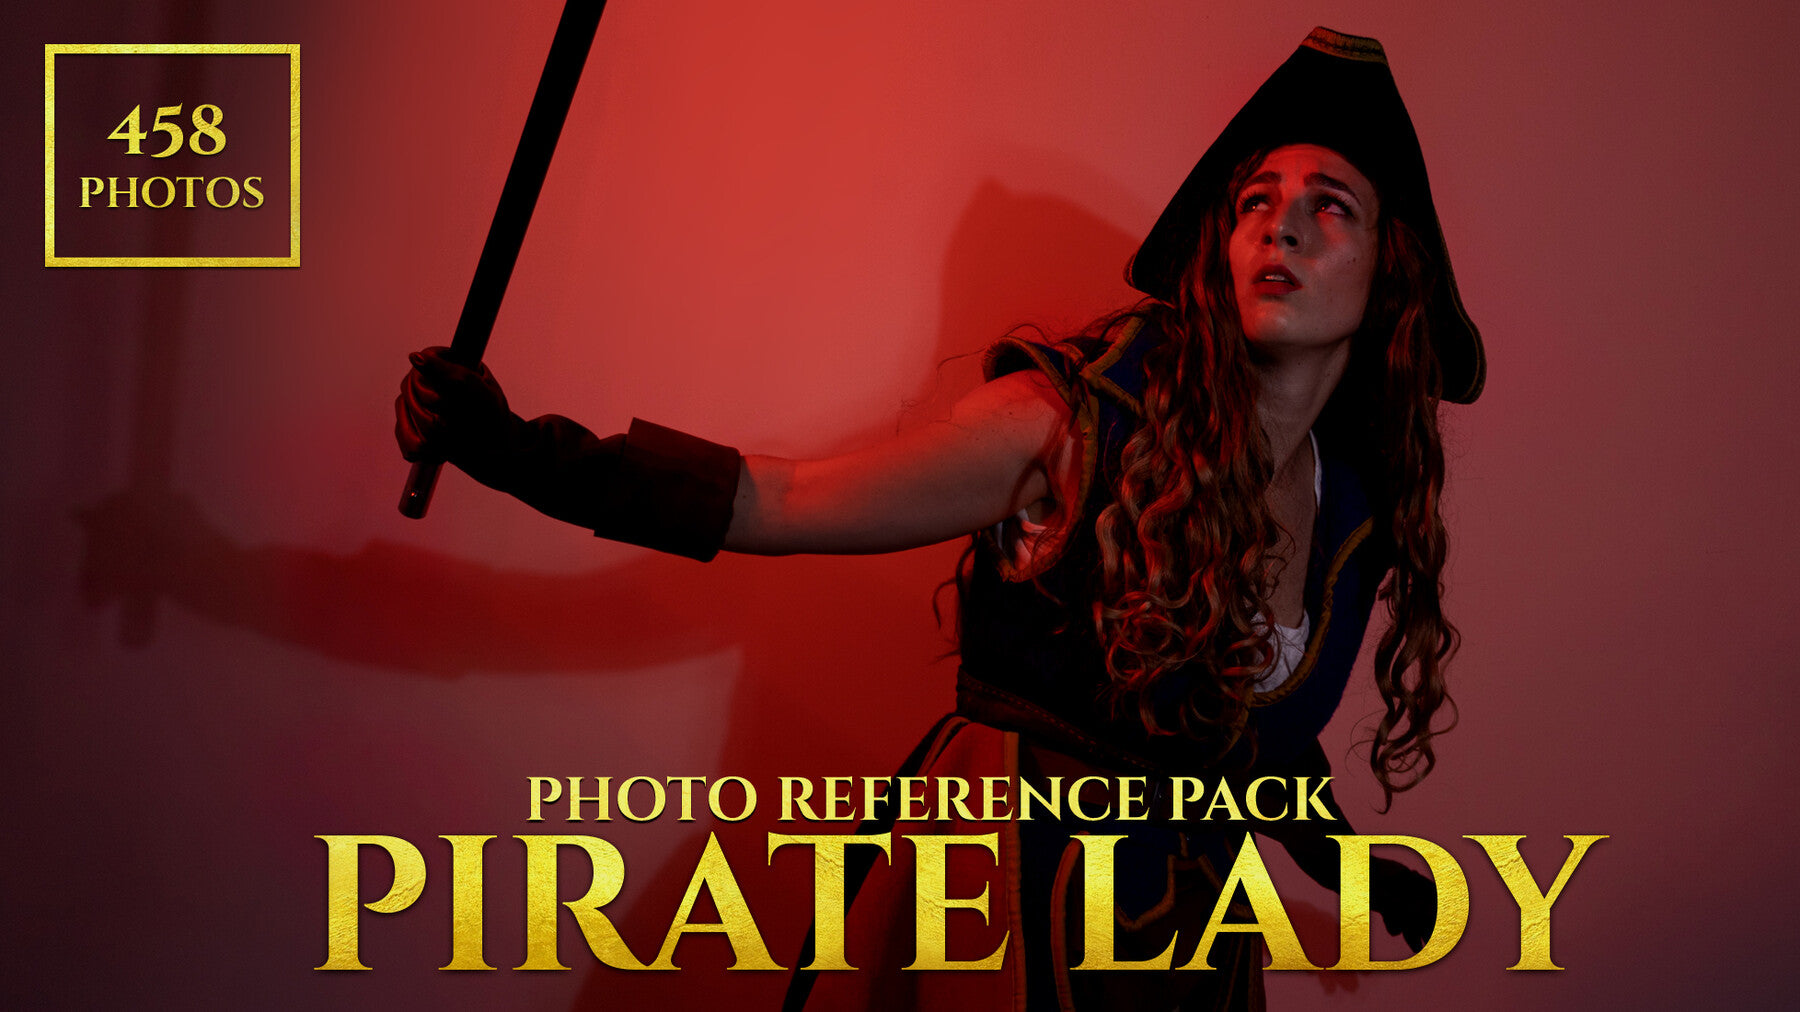 Pirate Lady - Photo Reference Pack For Artists 458 JPEGs